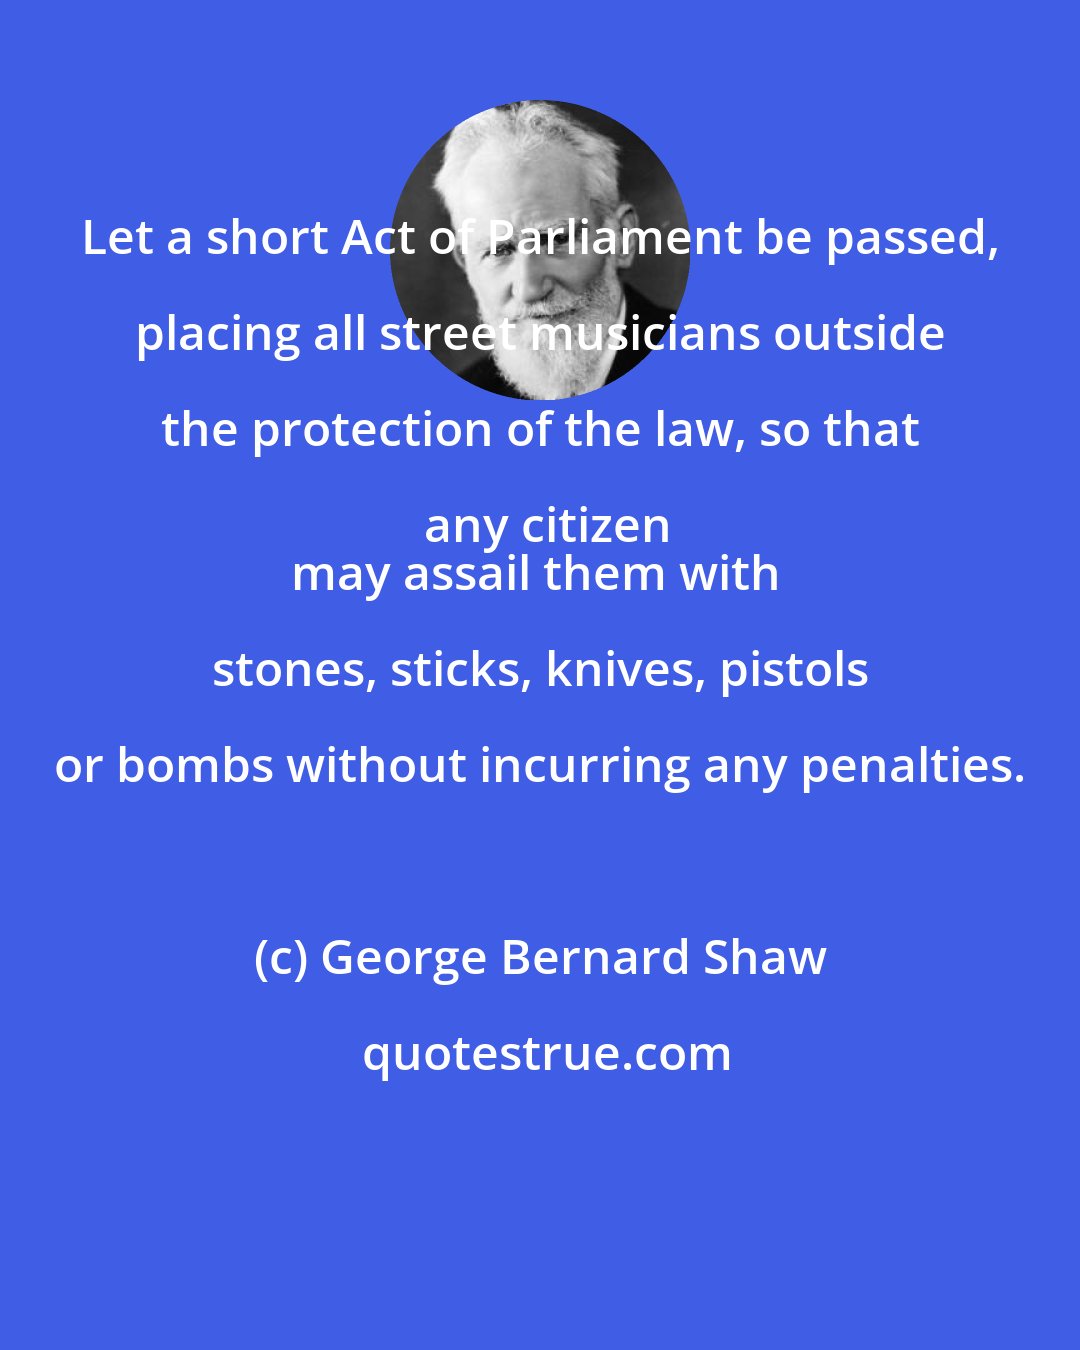 George Bernard Shaw: Let a short Act of Parliament be passed, placing all street musicians outside the protection of the law, so that any citizen
may assail them with stones, sticks, knives, pistols or bombs without incurring any penalties.